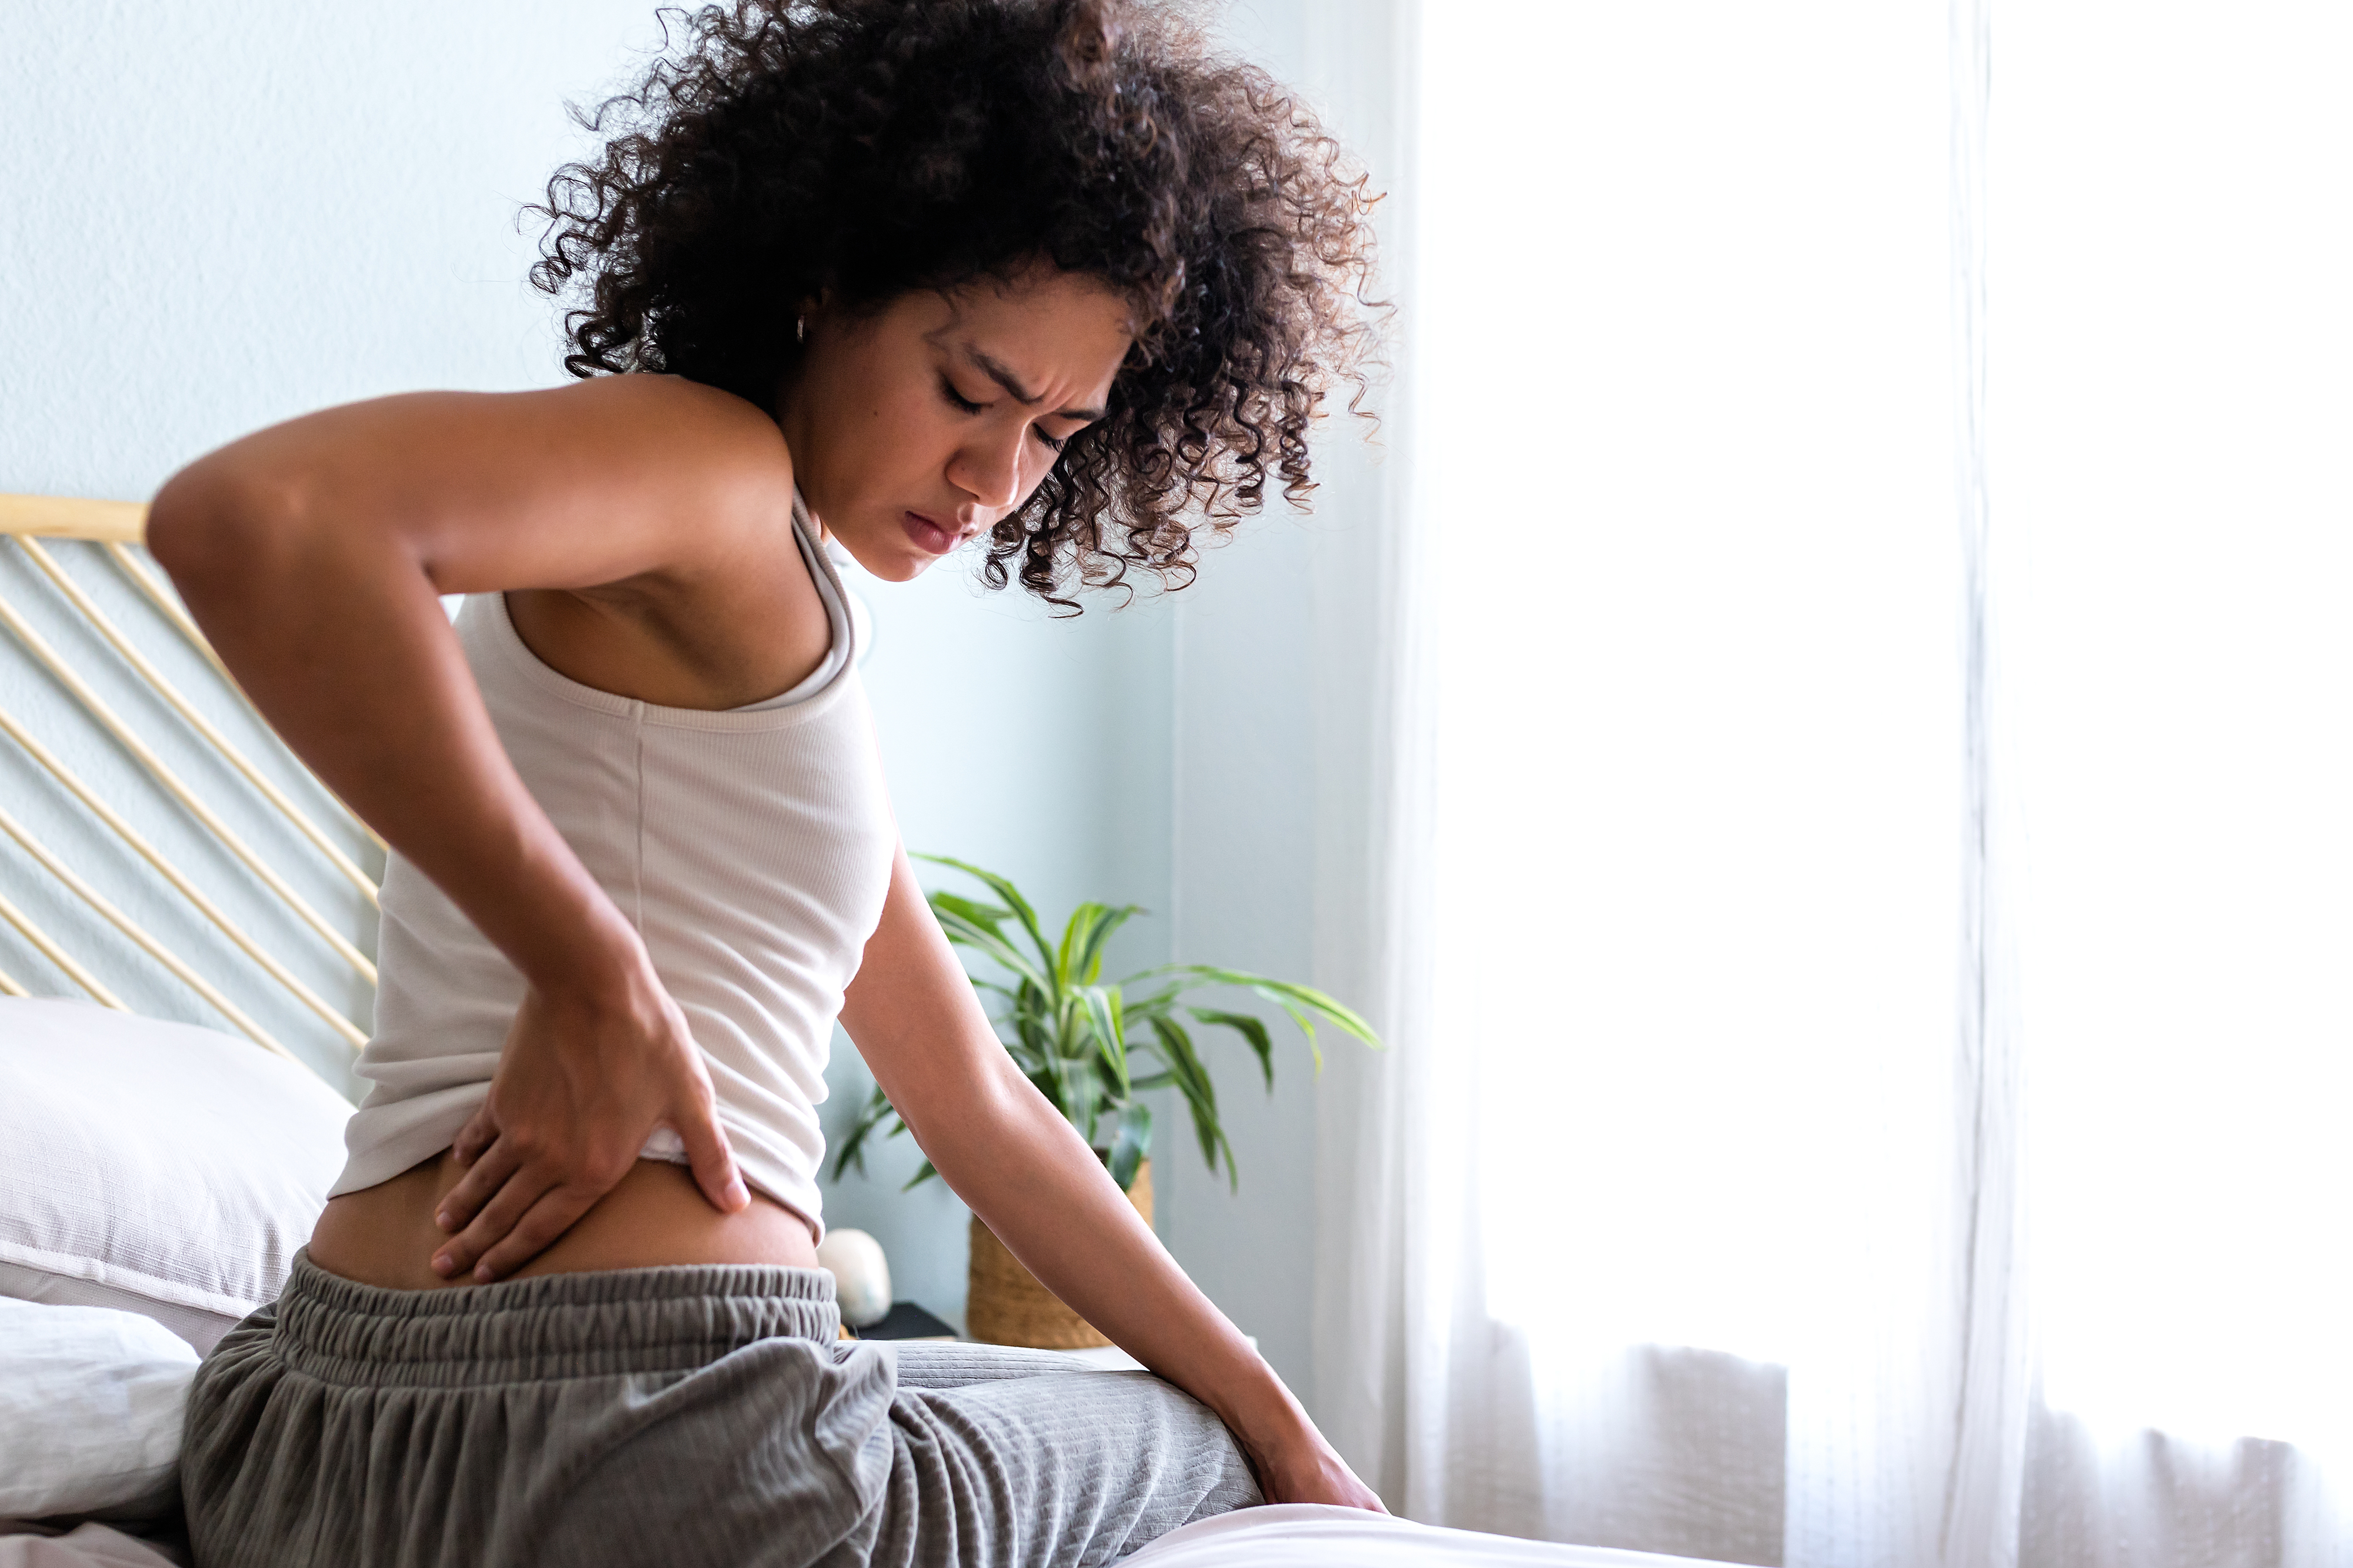 A woman sitting on a bed and touching her back in pain